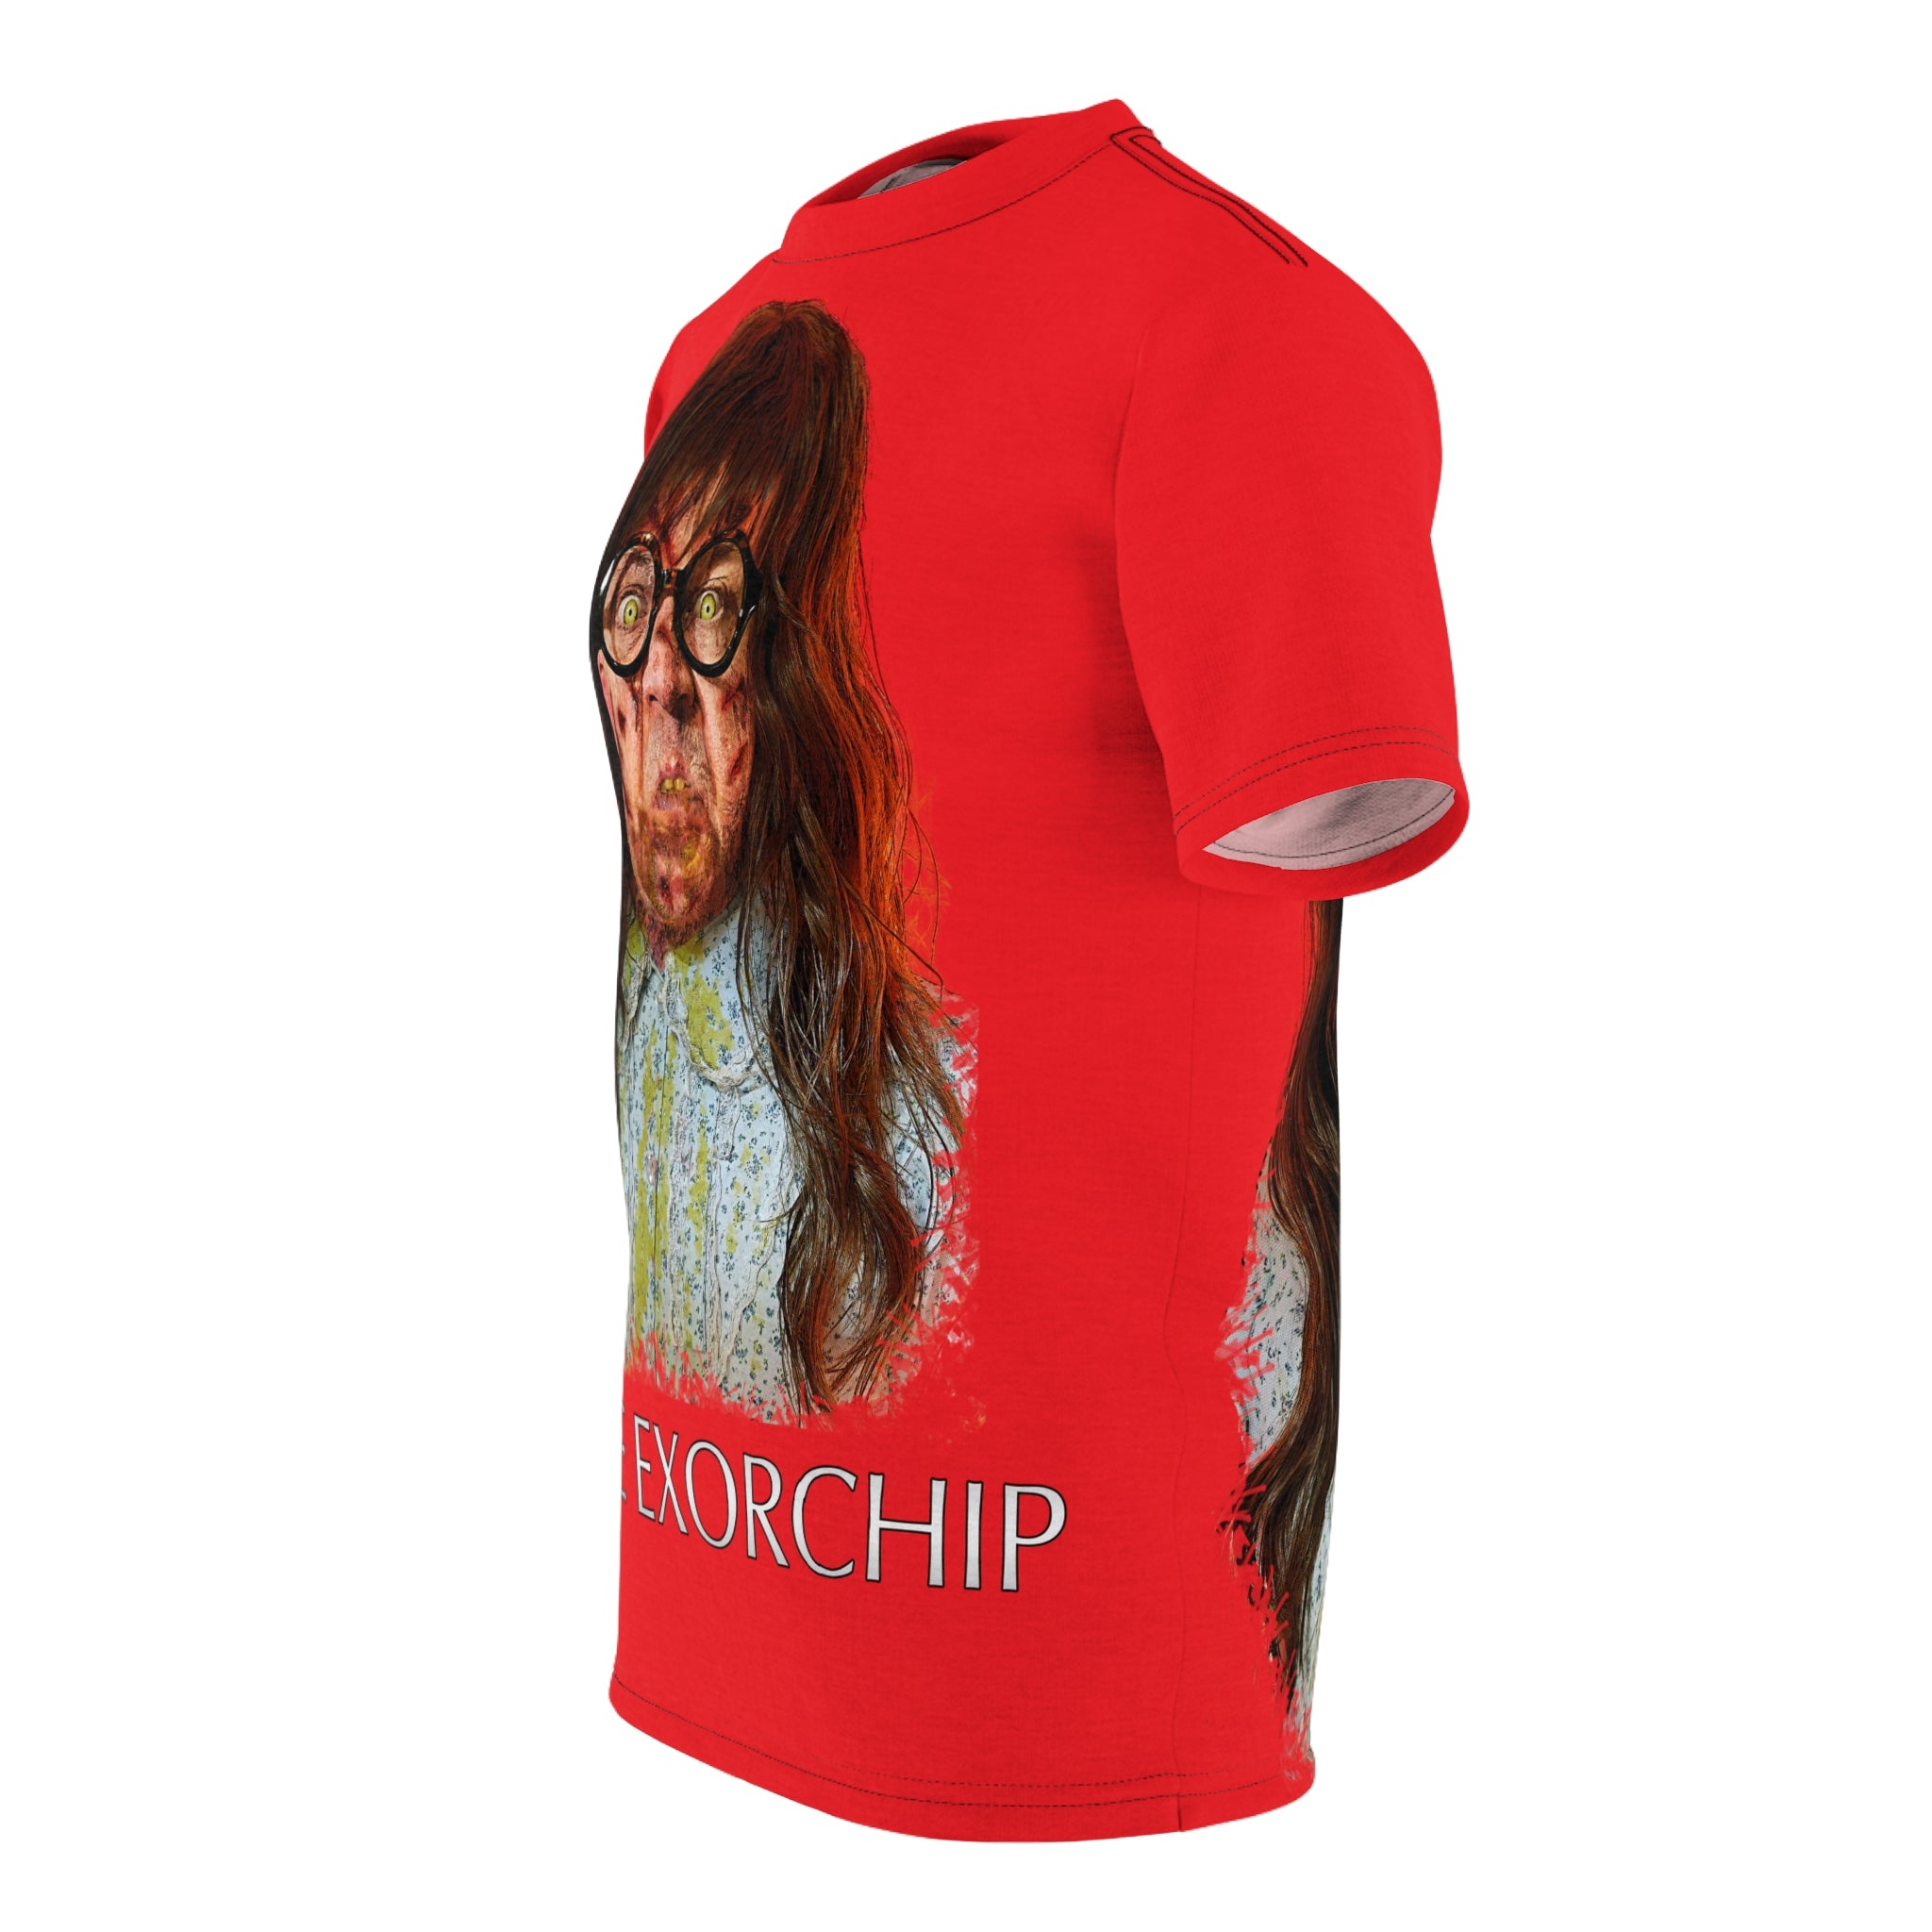 The EXORCHIP All Over Print Shirt